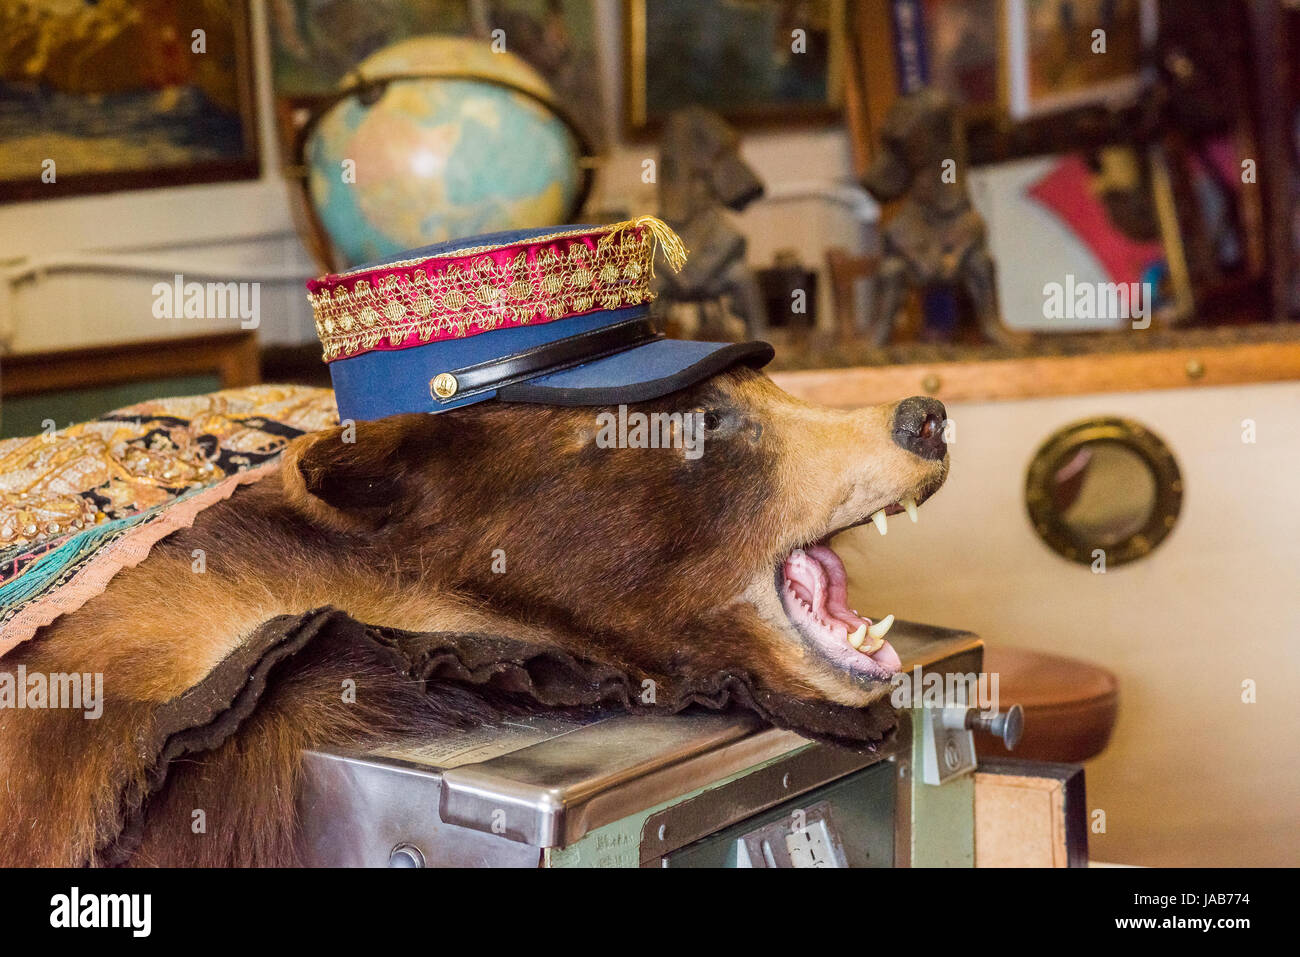 Bear rug with hat, Antique and collectibles store display Stock Photo